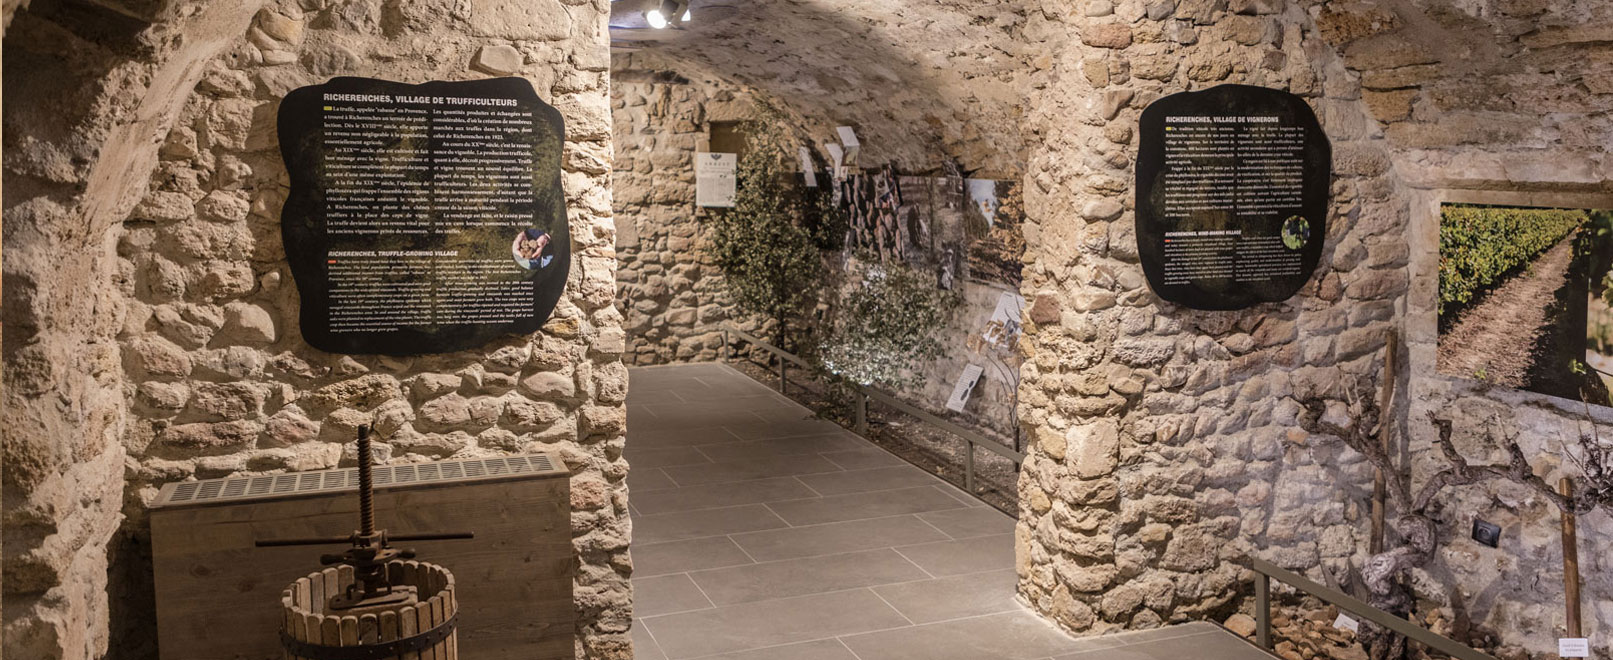 Truffle museum in Richerenches ©KESSLER G